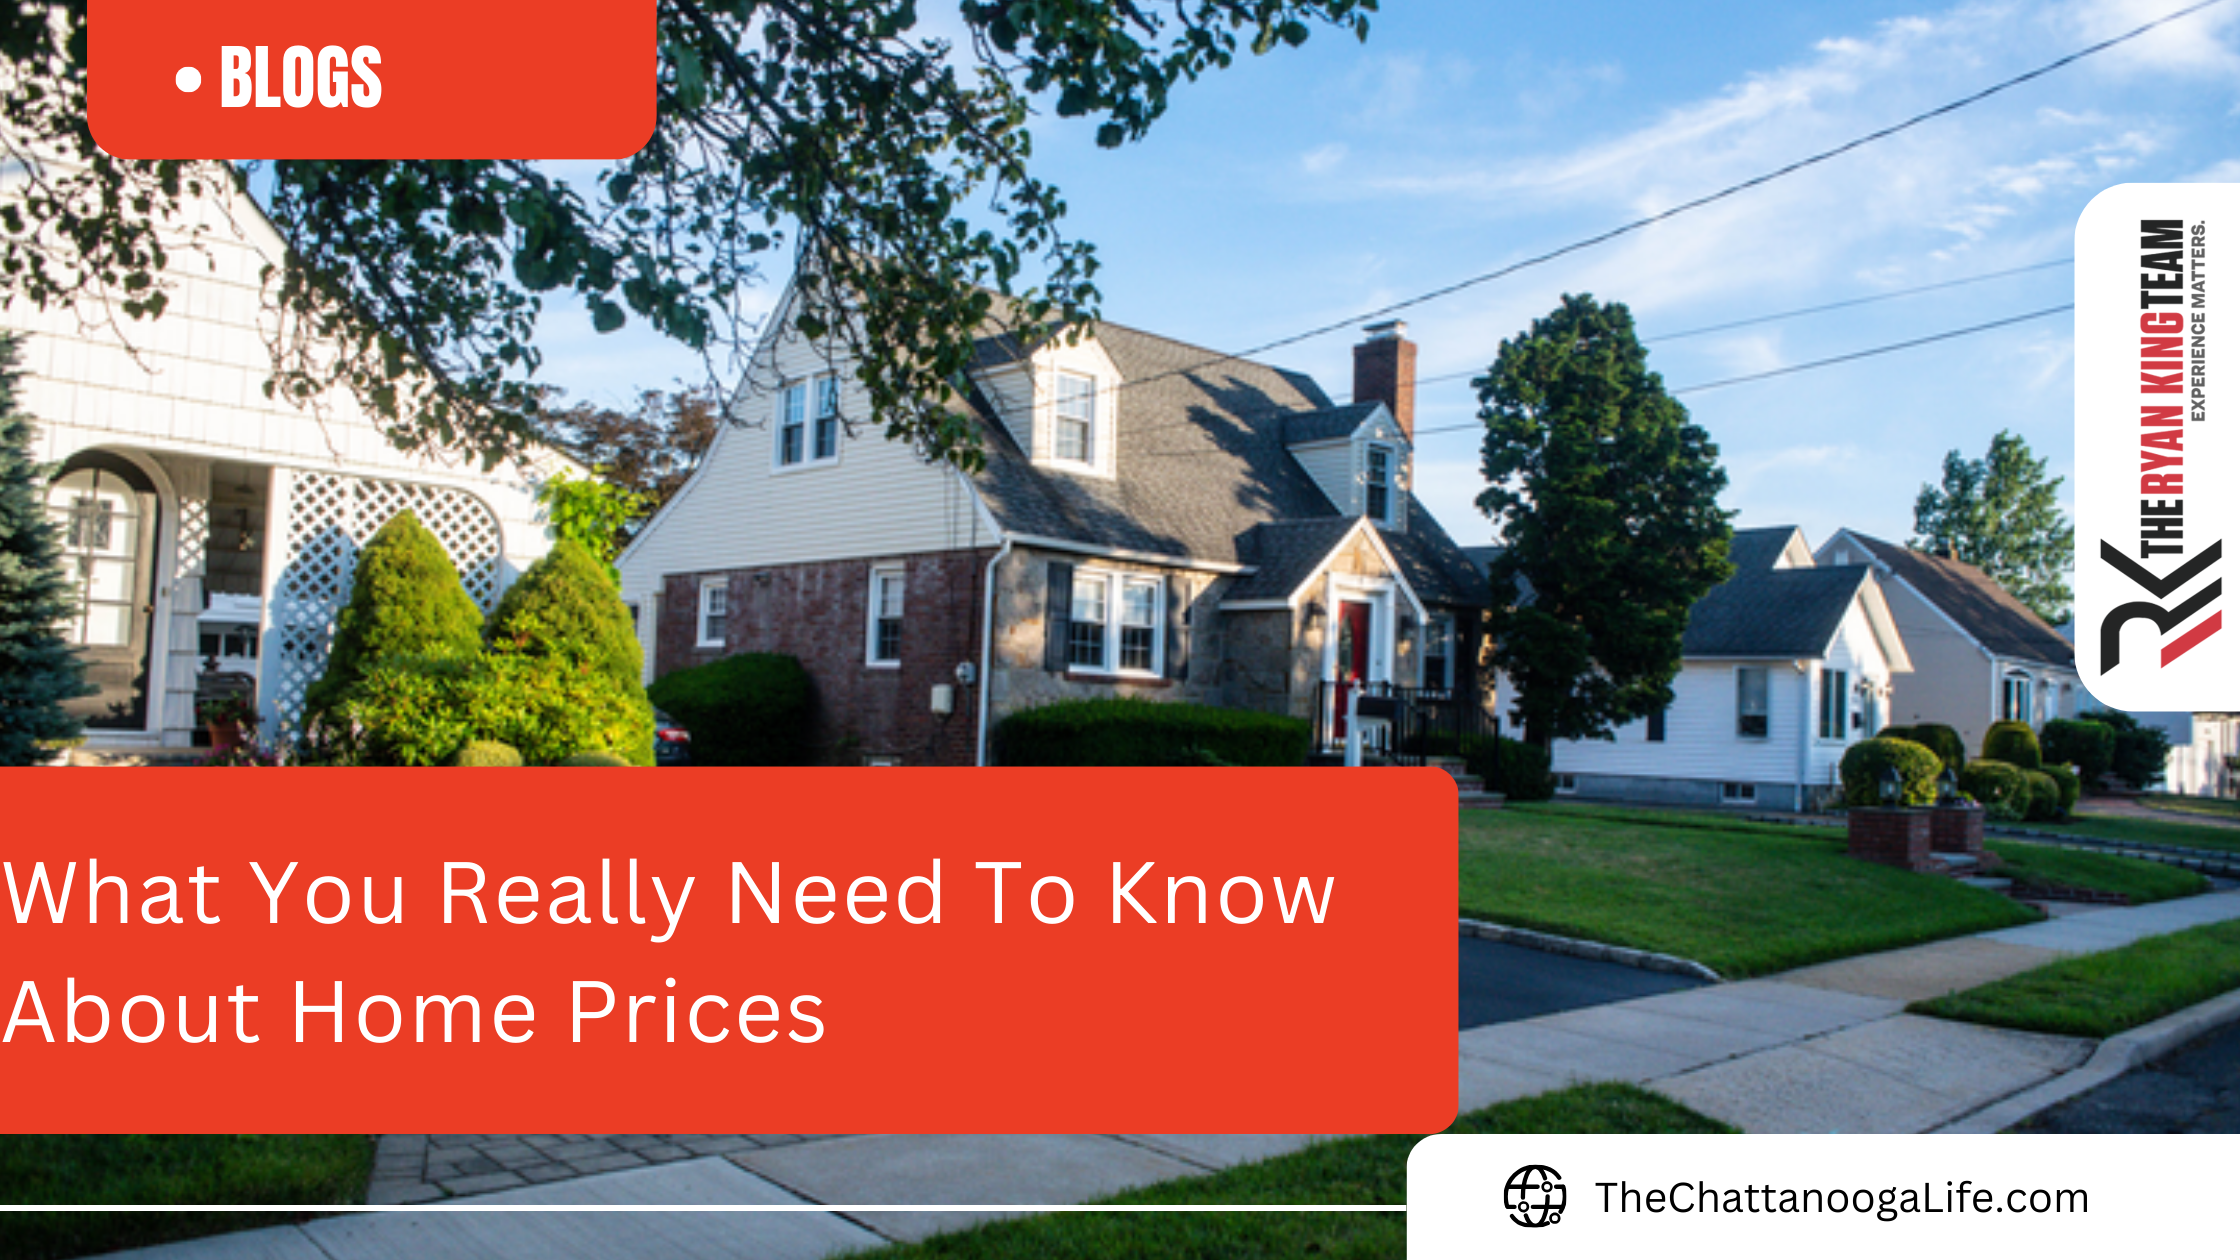 What You Really Need To Know About Home Prices